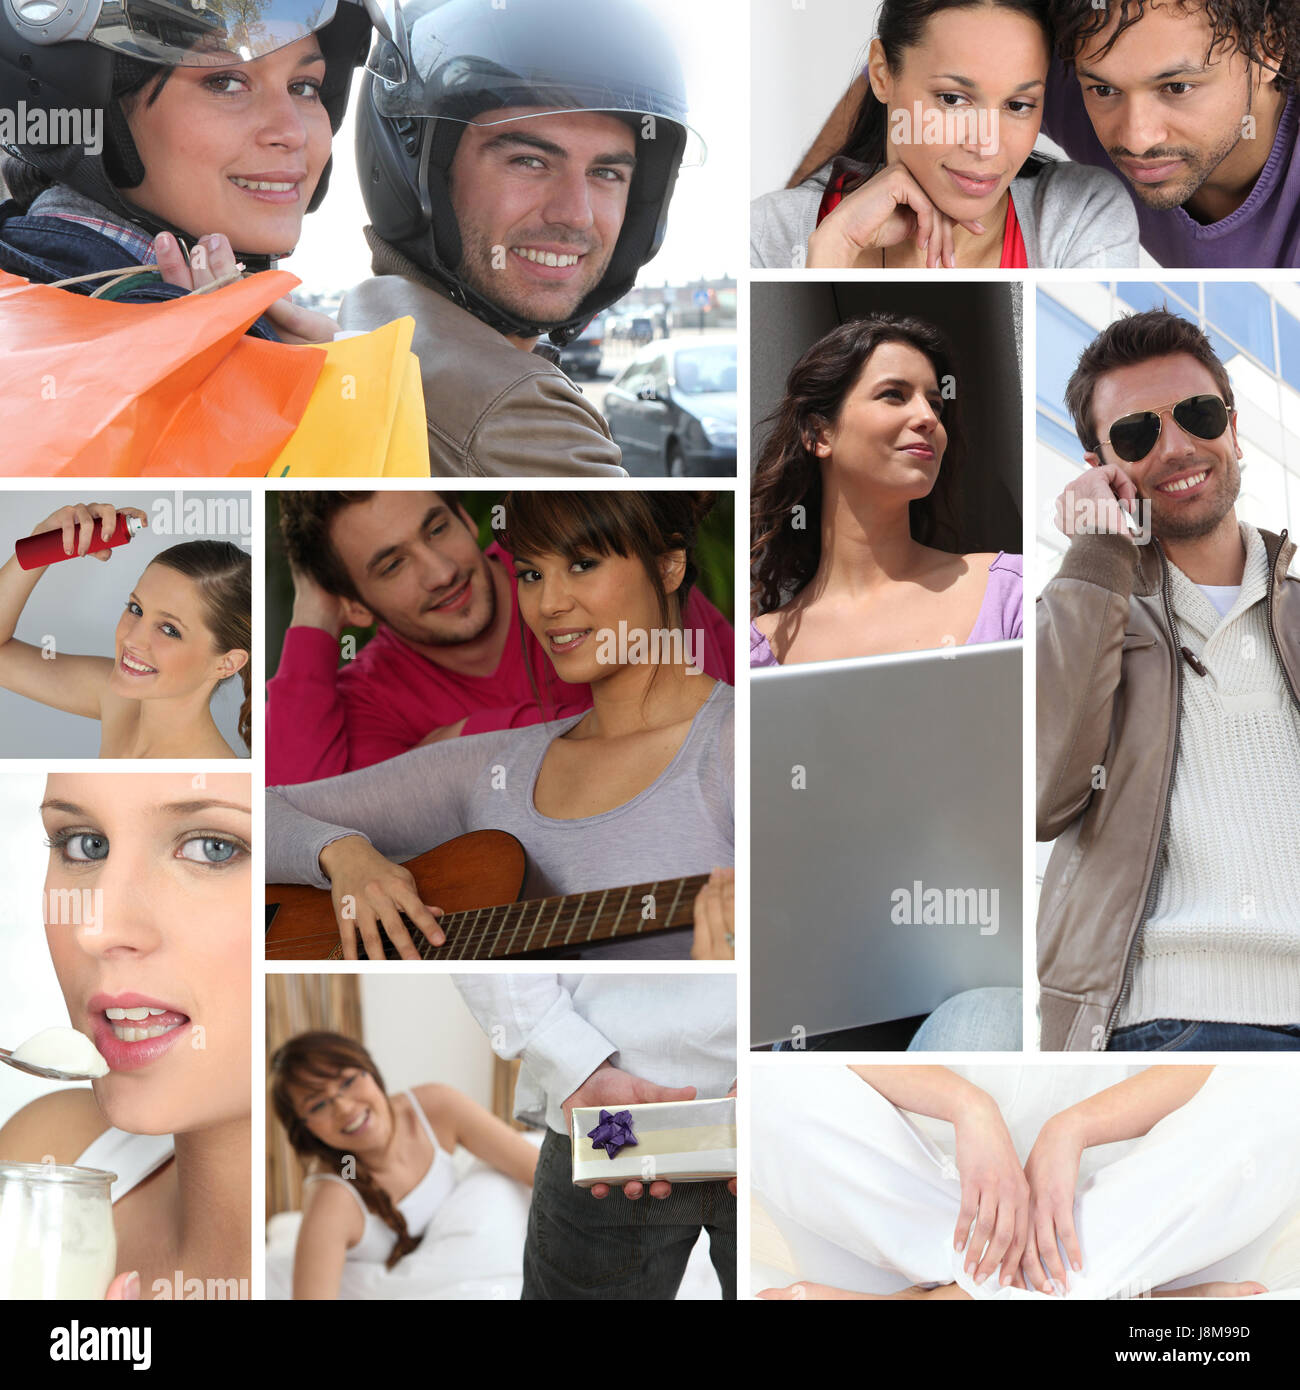 woman, keep together, human, human being, abreast, with each other, boys, Stock Photo